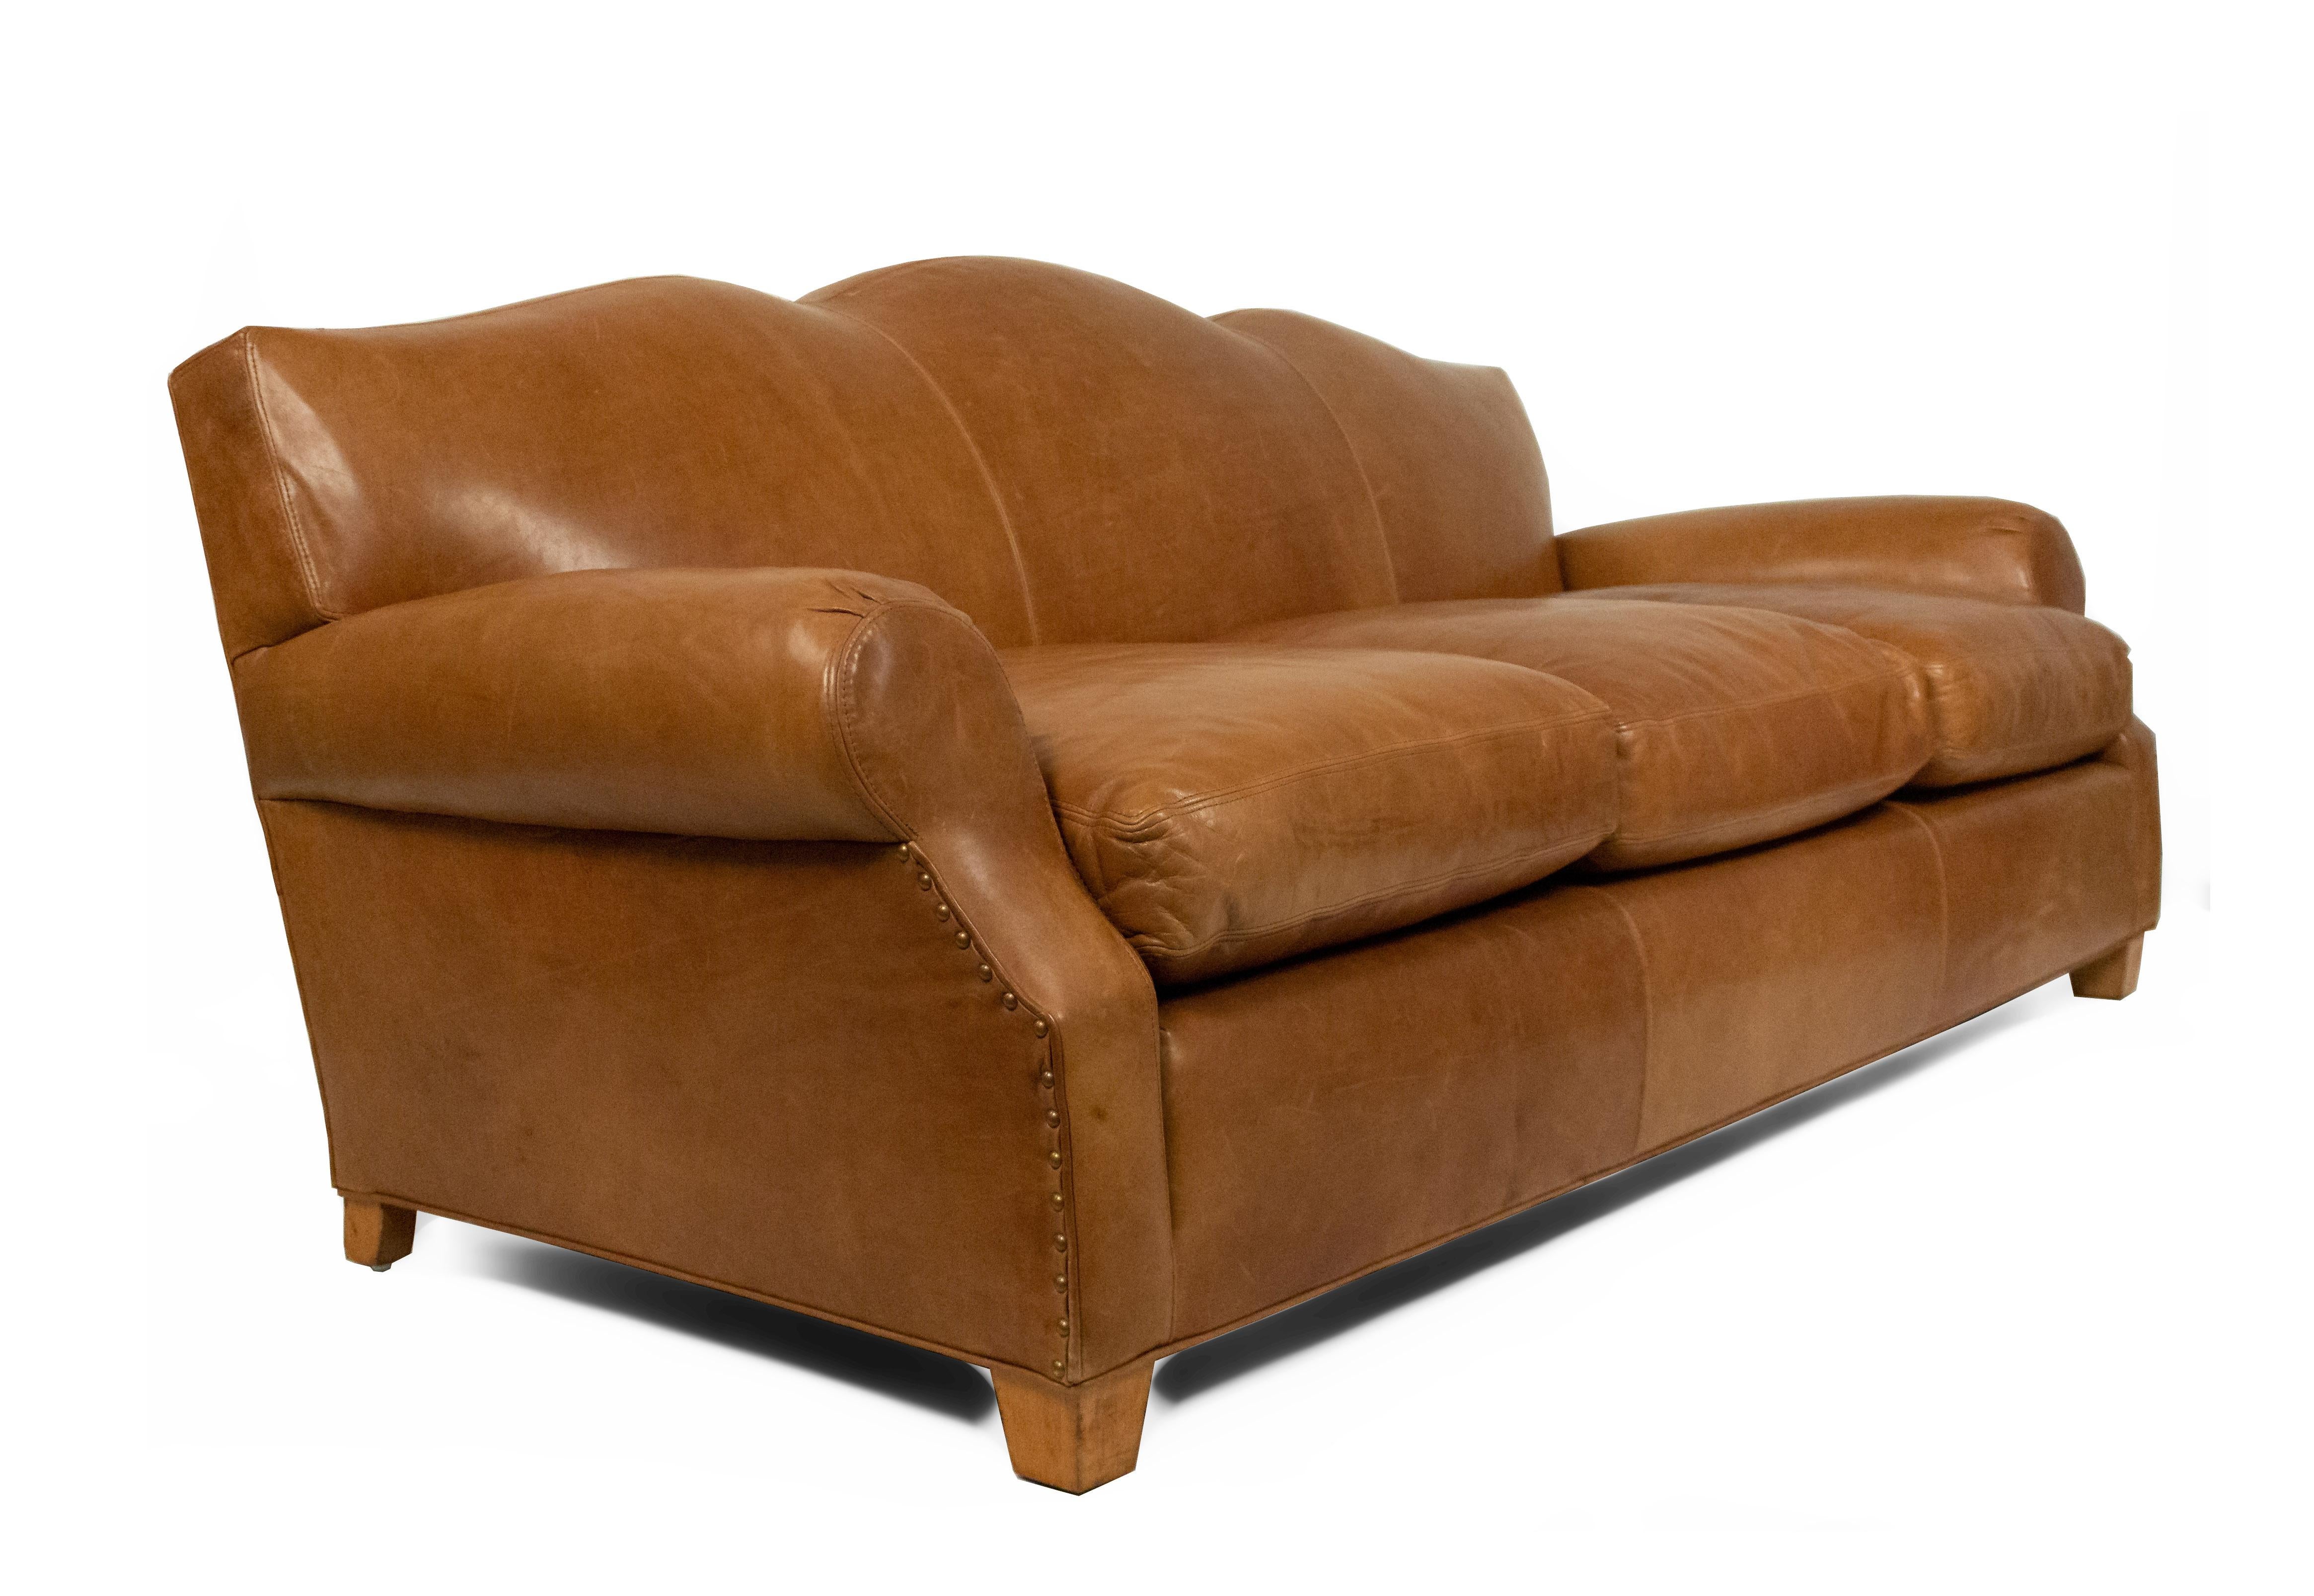 French Art Deco style tan leather camel back sofa with scrolled arms and three-seat cushion on wooden block feet.